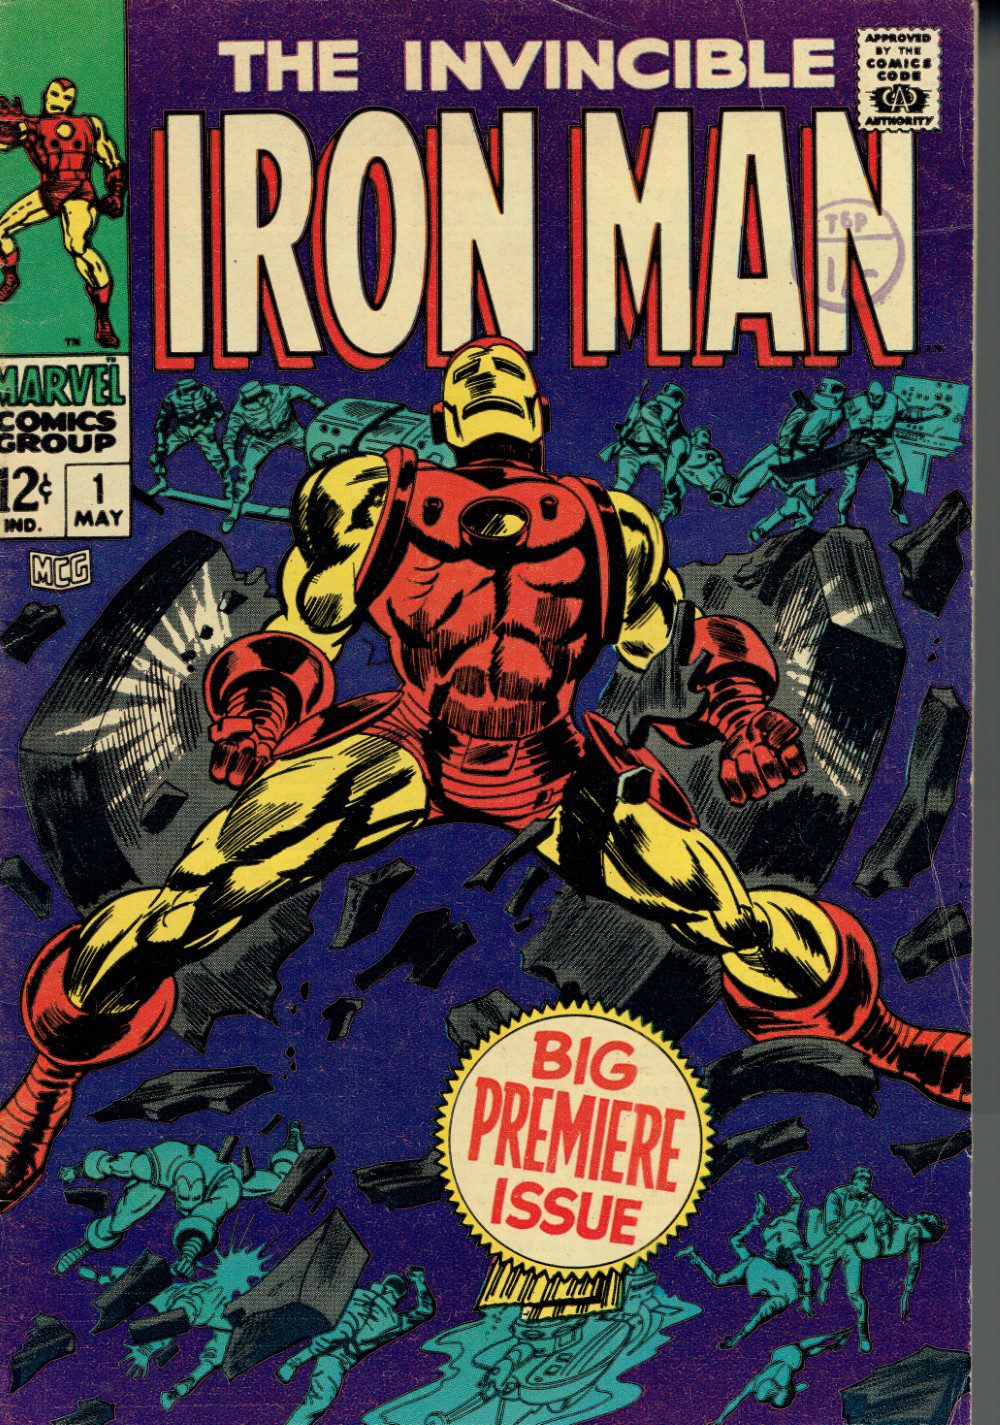 THE INVINCIBLE IRON MAN US MARVEL COMIC NO 20 FIRST ISSUE MAY 20968